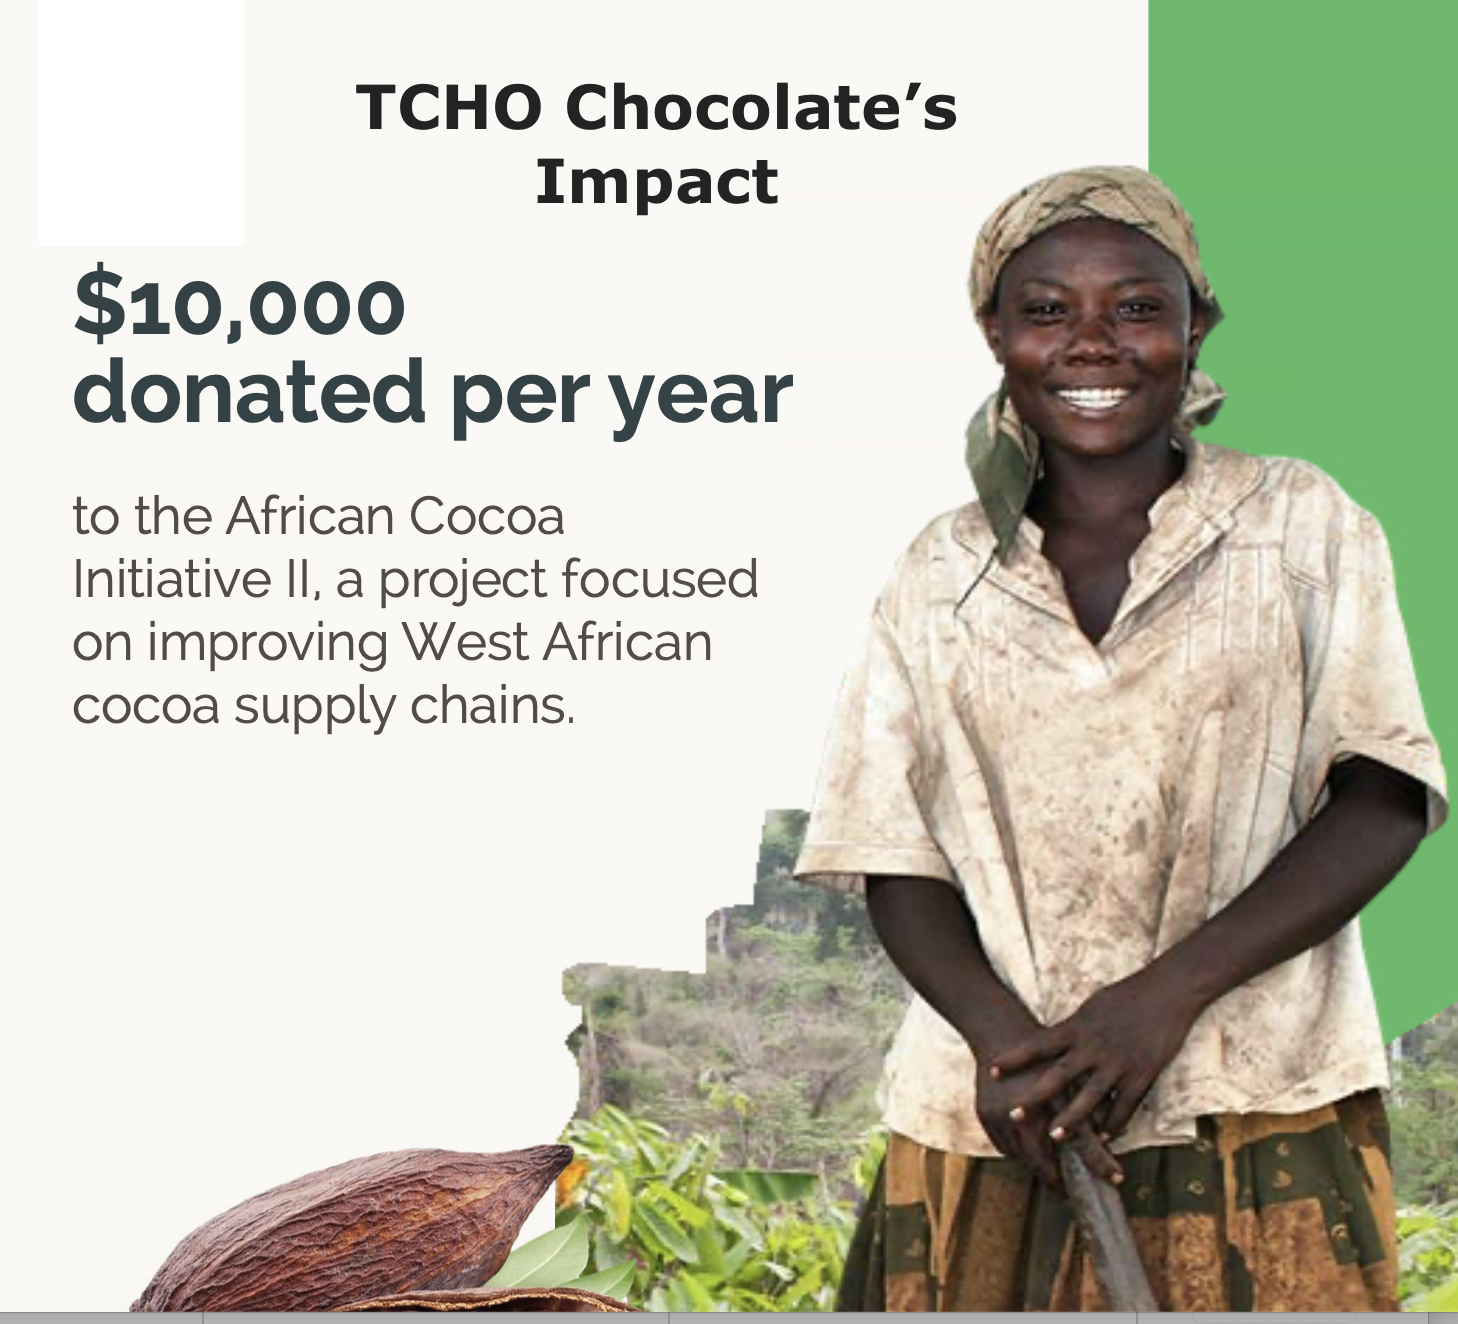 Tcho Chocolate's Impact shows $10,000 donated per year to the African Cocoa Initiative II